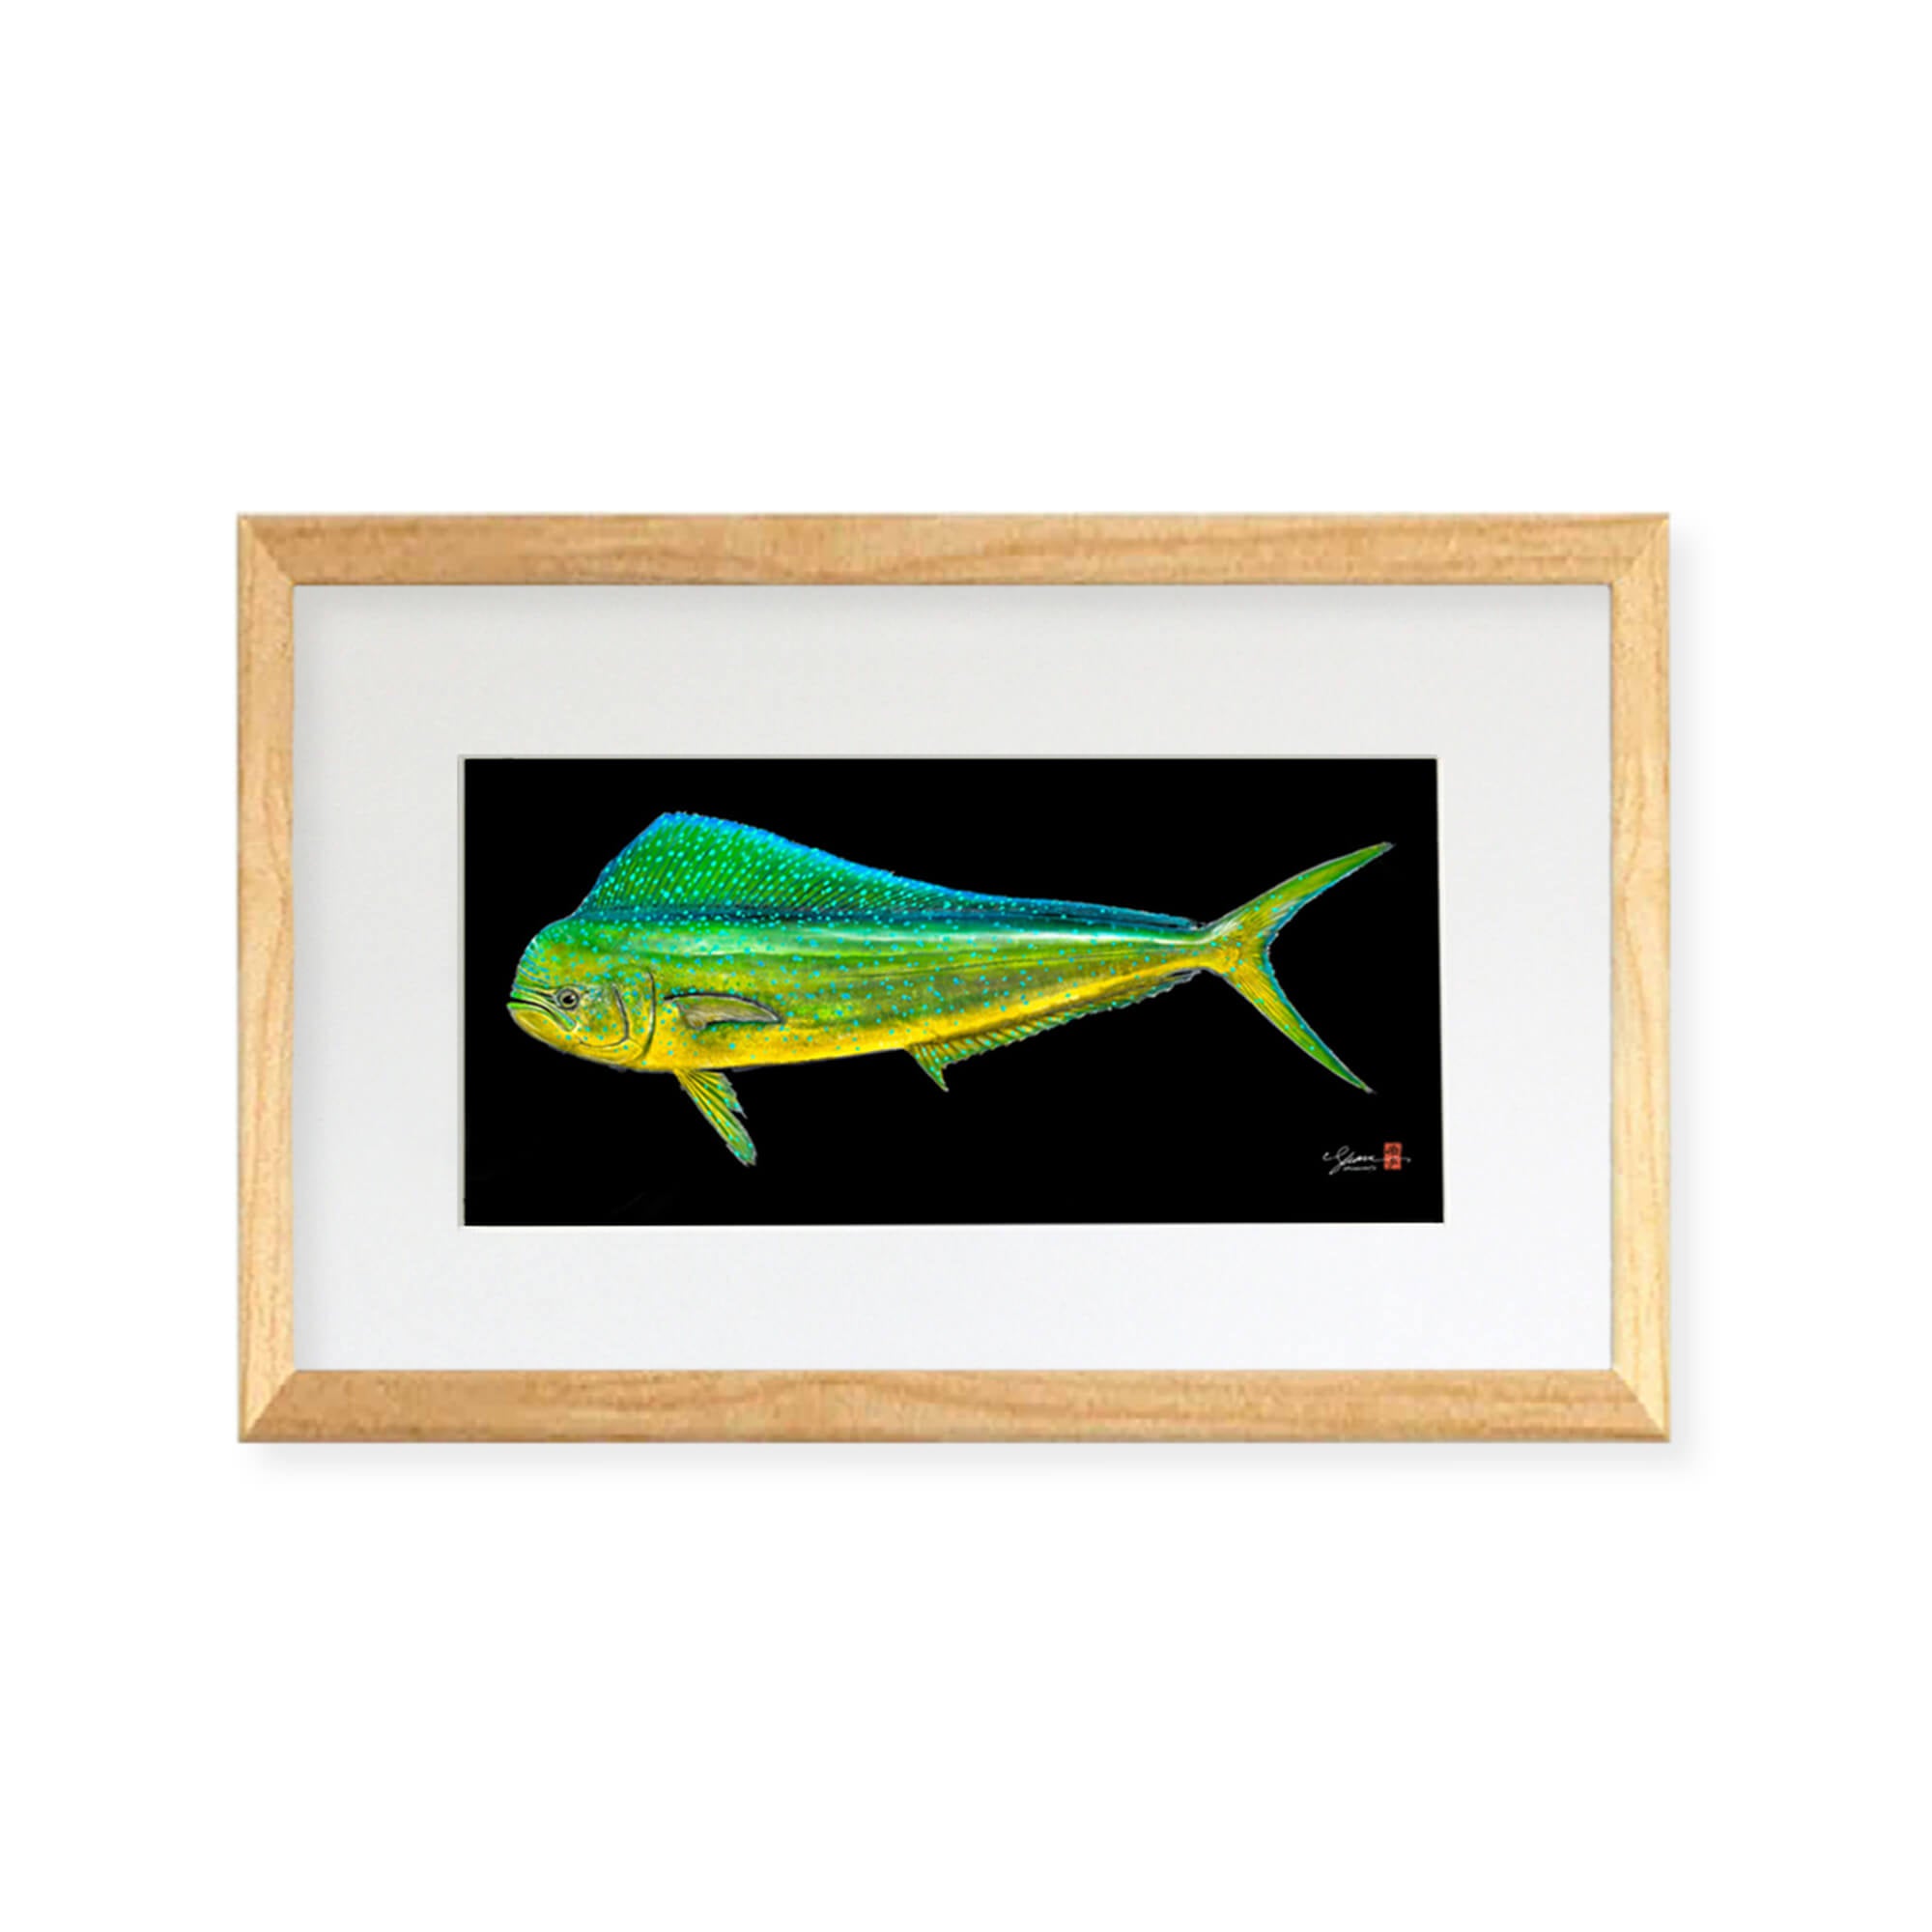 Framed matted print of a large Mahi Mahi fish (also known as Dolphin Fish or Dorado) distinguished by dazzling colors - golden on the sides, and bright blues and greens on the sides and back by Hawaii Gyotaku artist Shane Hamamoto